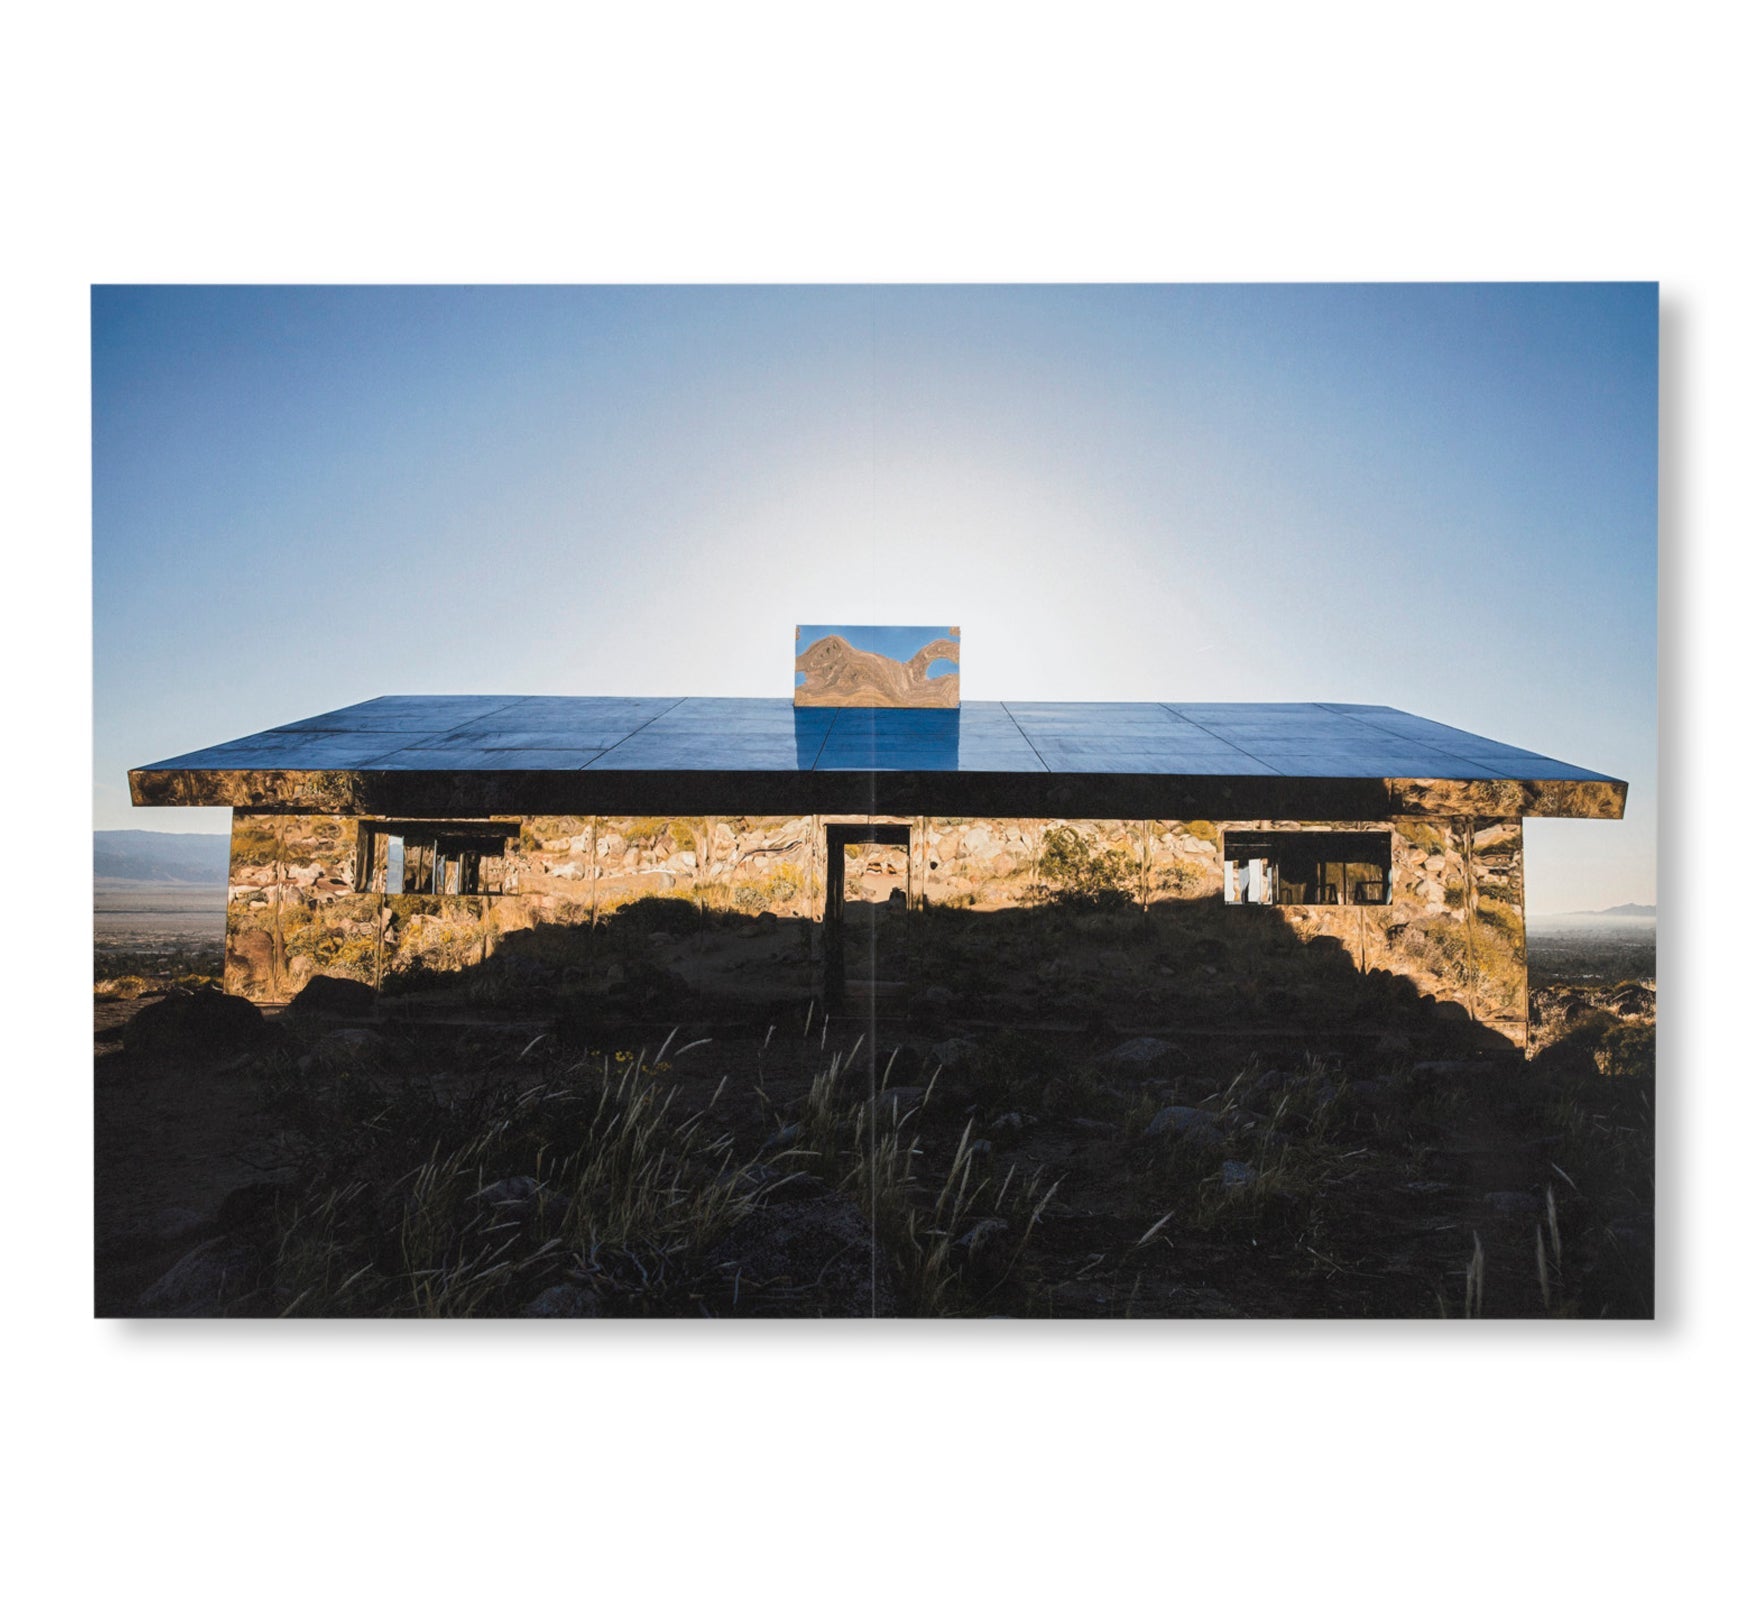 MIRAGE by Doug Aitken [SPECIAL EDITION]